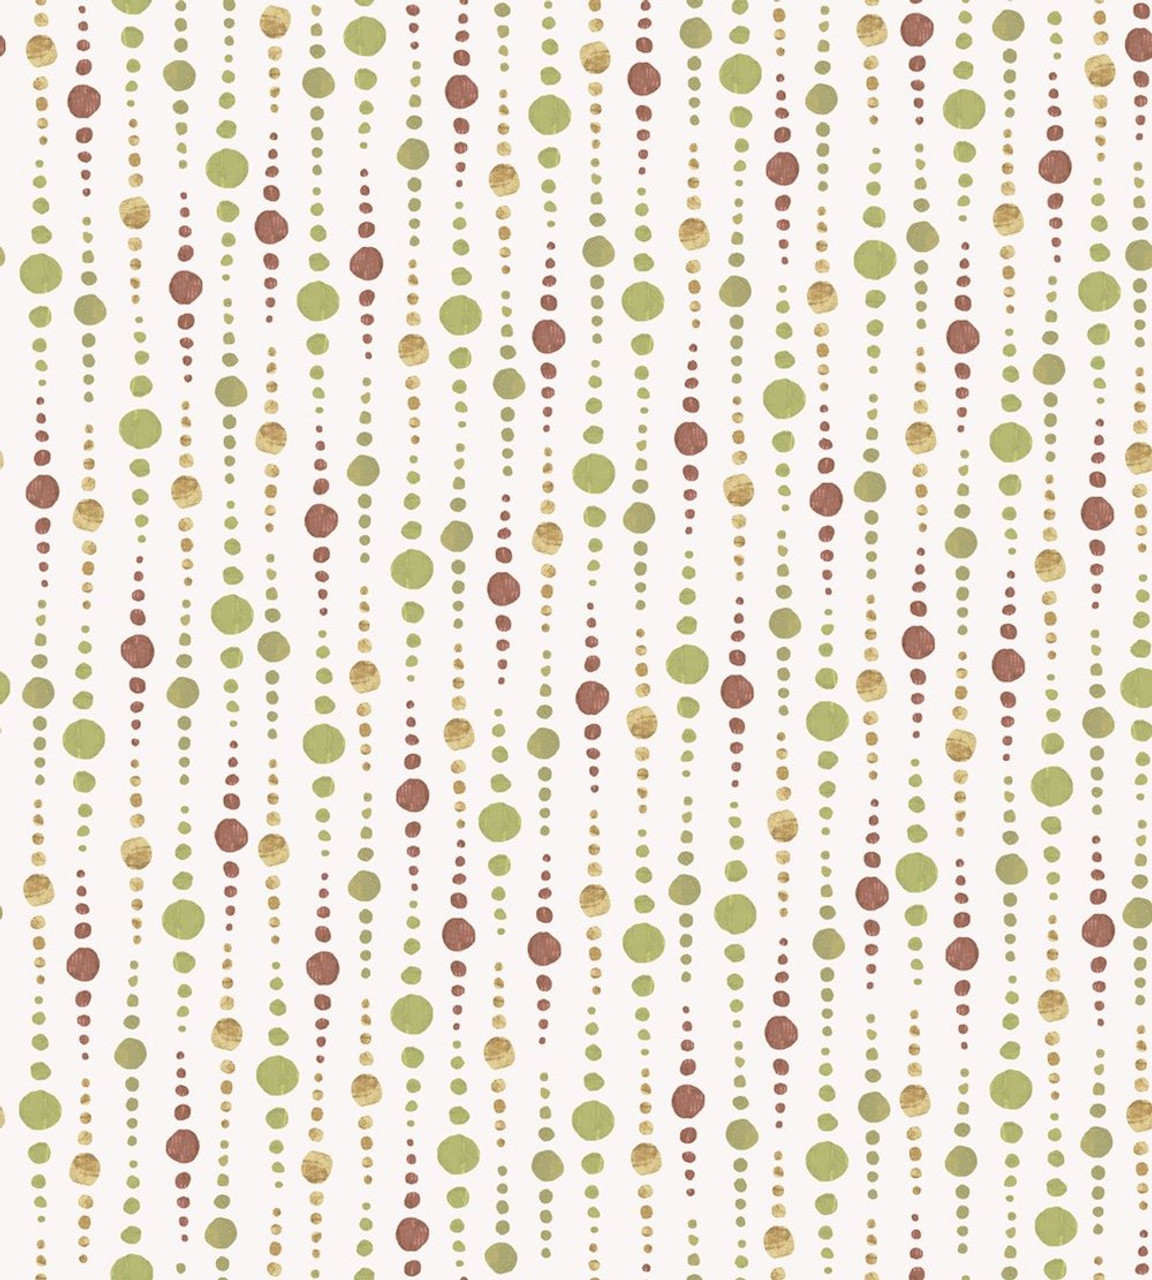 Stof Fabrics Murano Collection Dots Terra Cotta & Green Cotton Fabric By The Yard